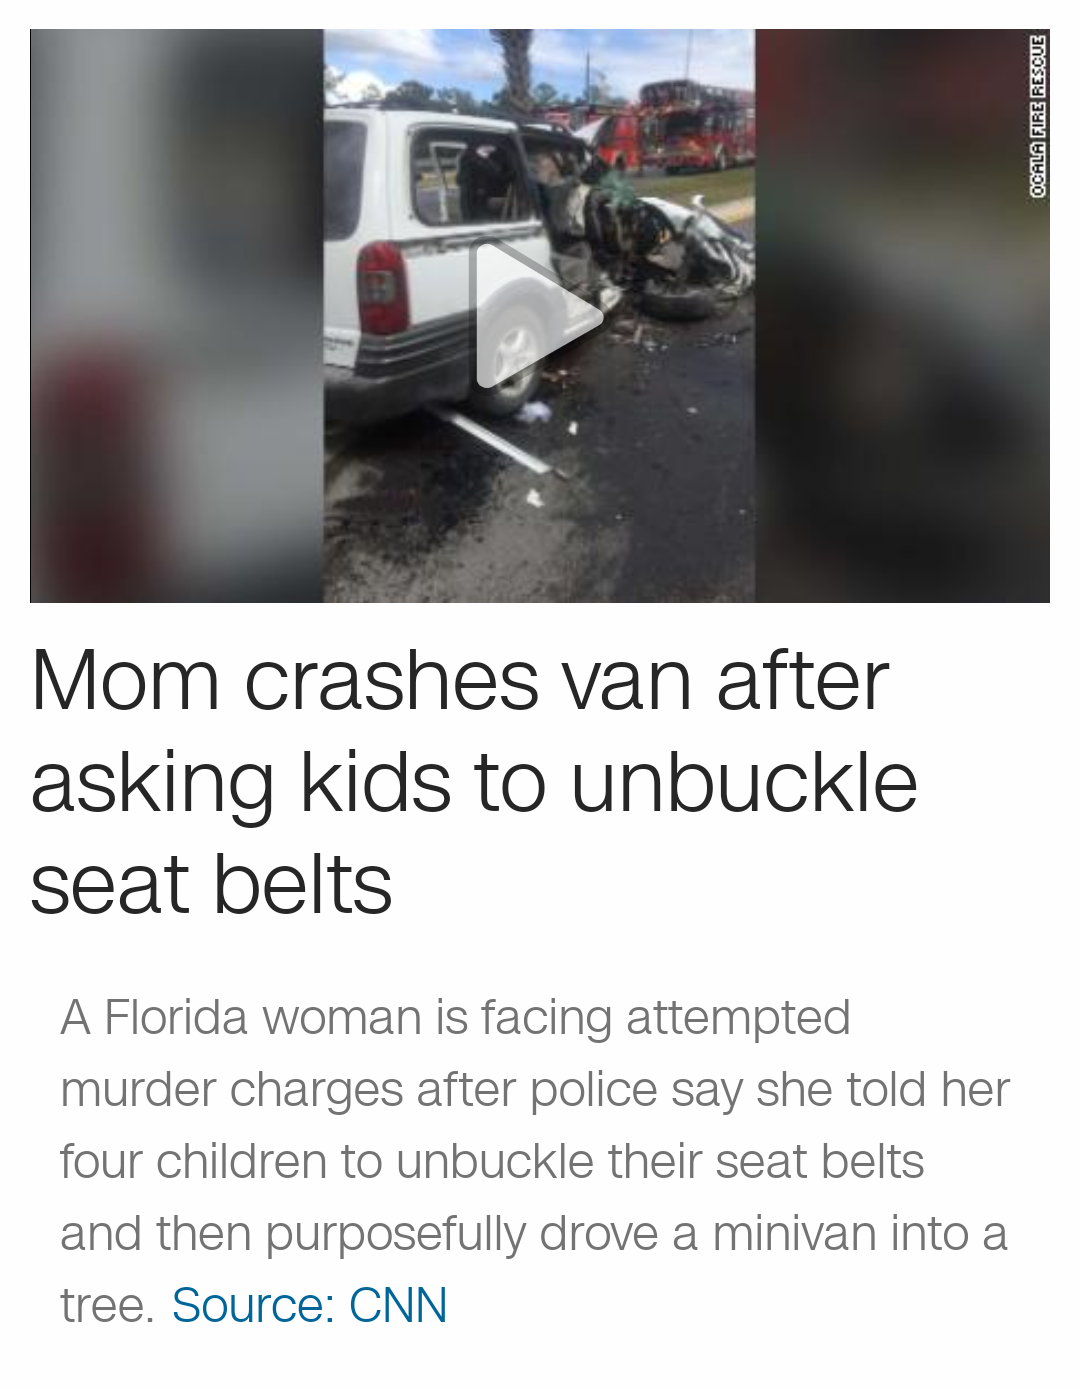 vehicle - Mom crashes van after asking kids to unbuckle seat belts A Florida woman is facing attempted murder charges after police say she told her four children to unbuckle their seat belts and then purposefully drove a minivan into a tree. Source Cnn